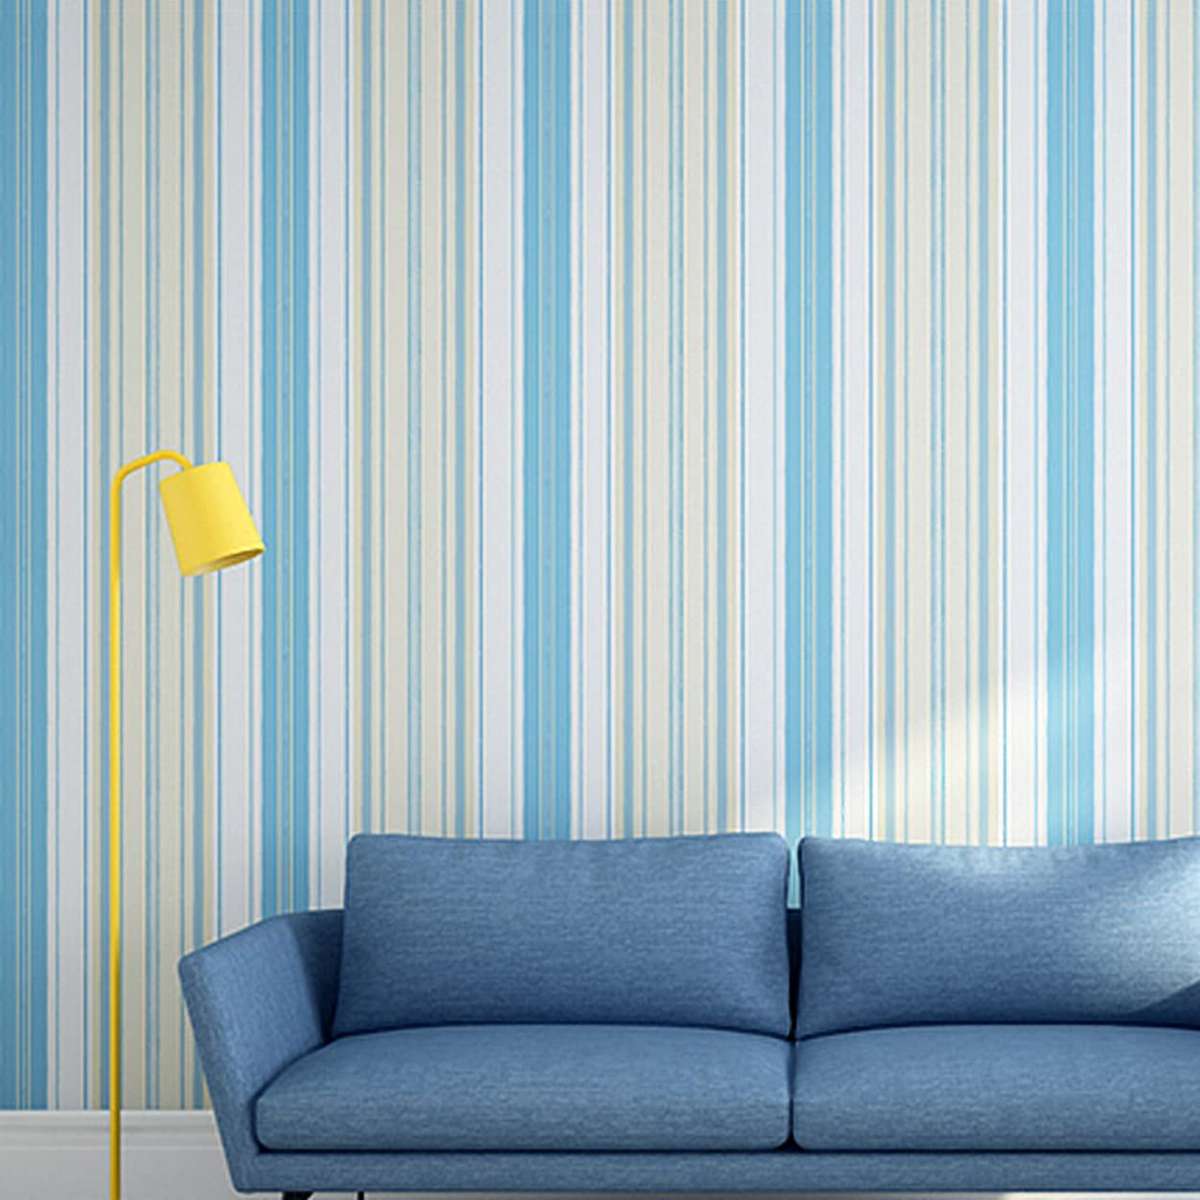 wolpin Wall Stickers DIY Wallpaper for Hall (45 x 500 cm), Vertical Stripes Home Office Modern Design, Self Adhesive Decals, Yellow